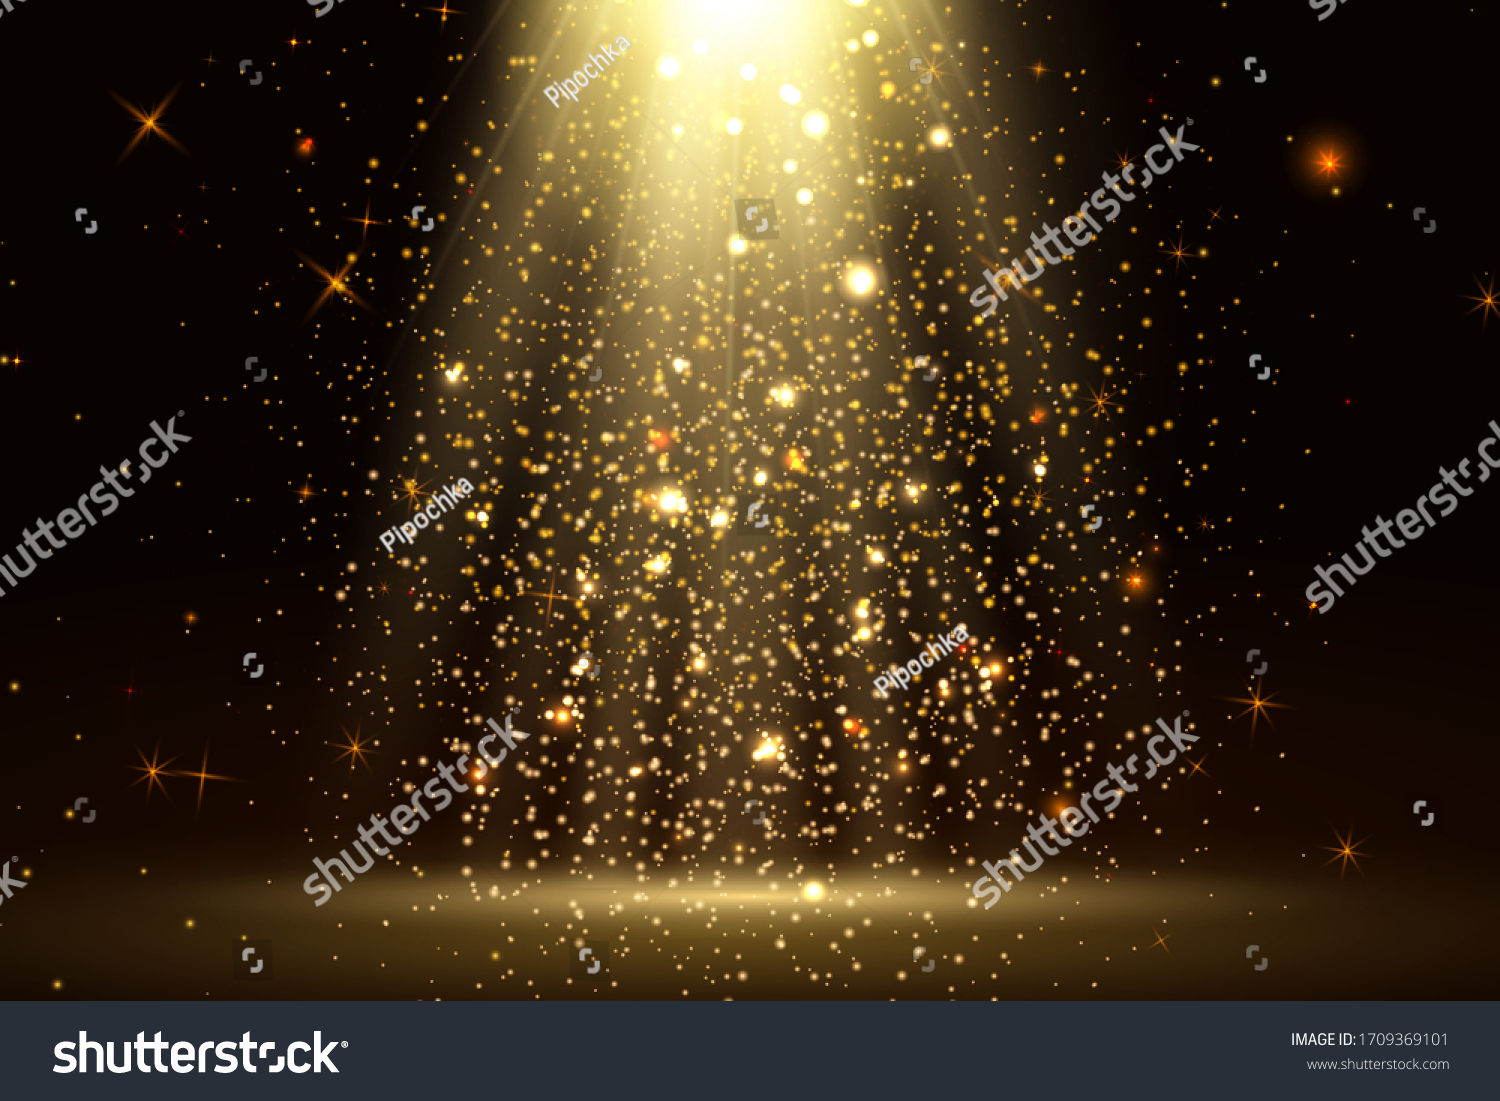 Stage light and golden glitter lights effect with gold rays, beams and falling glittering dust on floor. Abstract gold background for display your product. Shiny spotlight or stage. vector. #1709369101